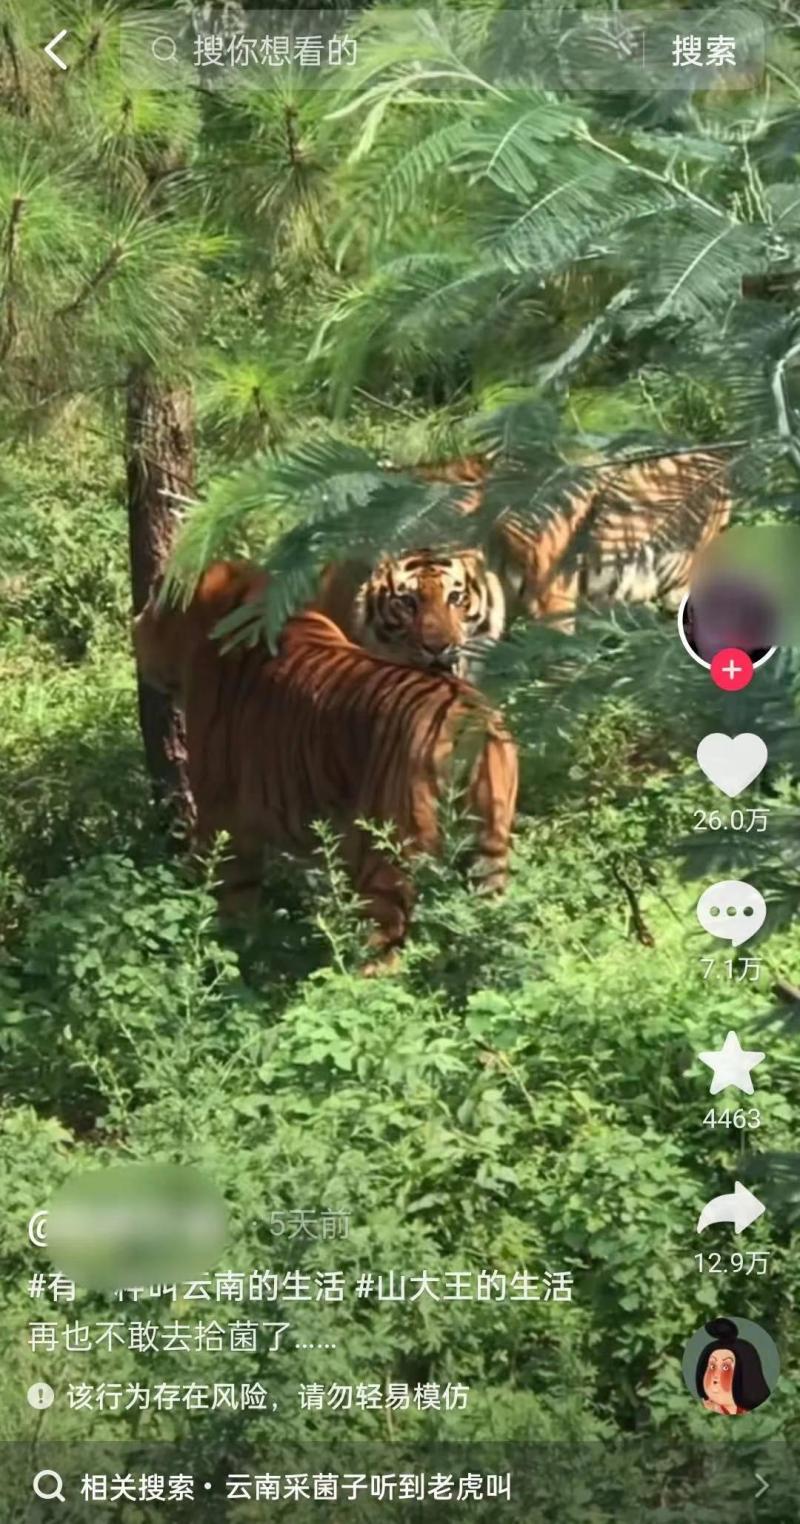 Police: The man who spread rumors has been detained for 5 days and encountered a tiger while picking up mushrooms on the mountain? Video taken at the zoo in Yunnan | Video | Police